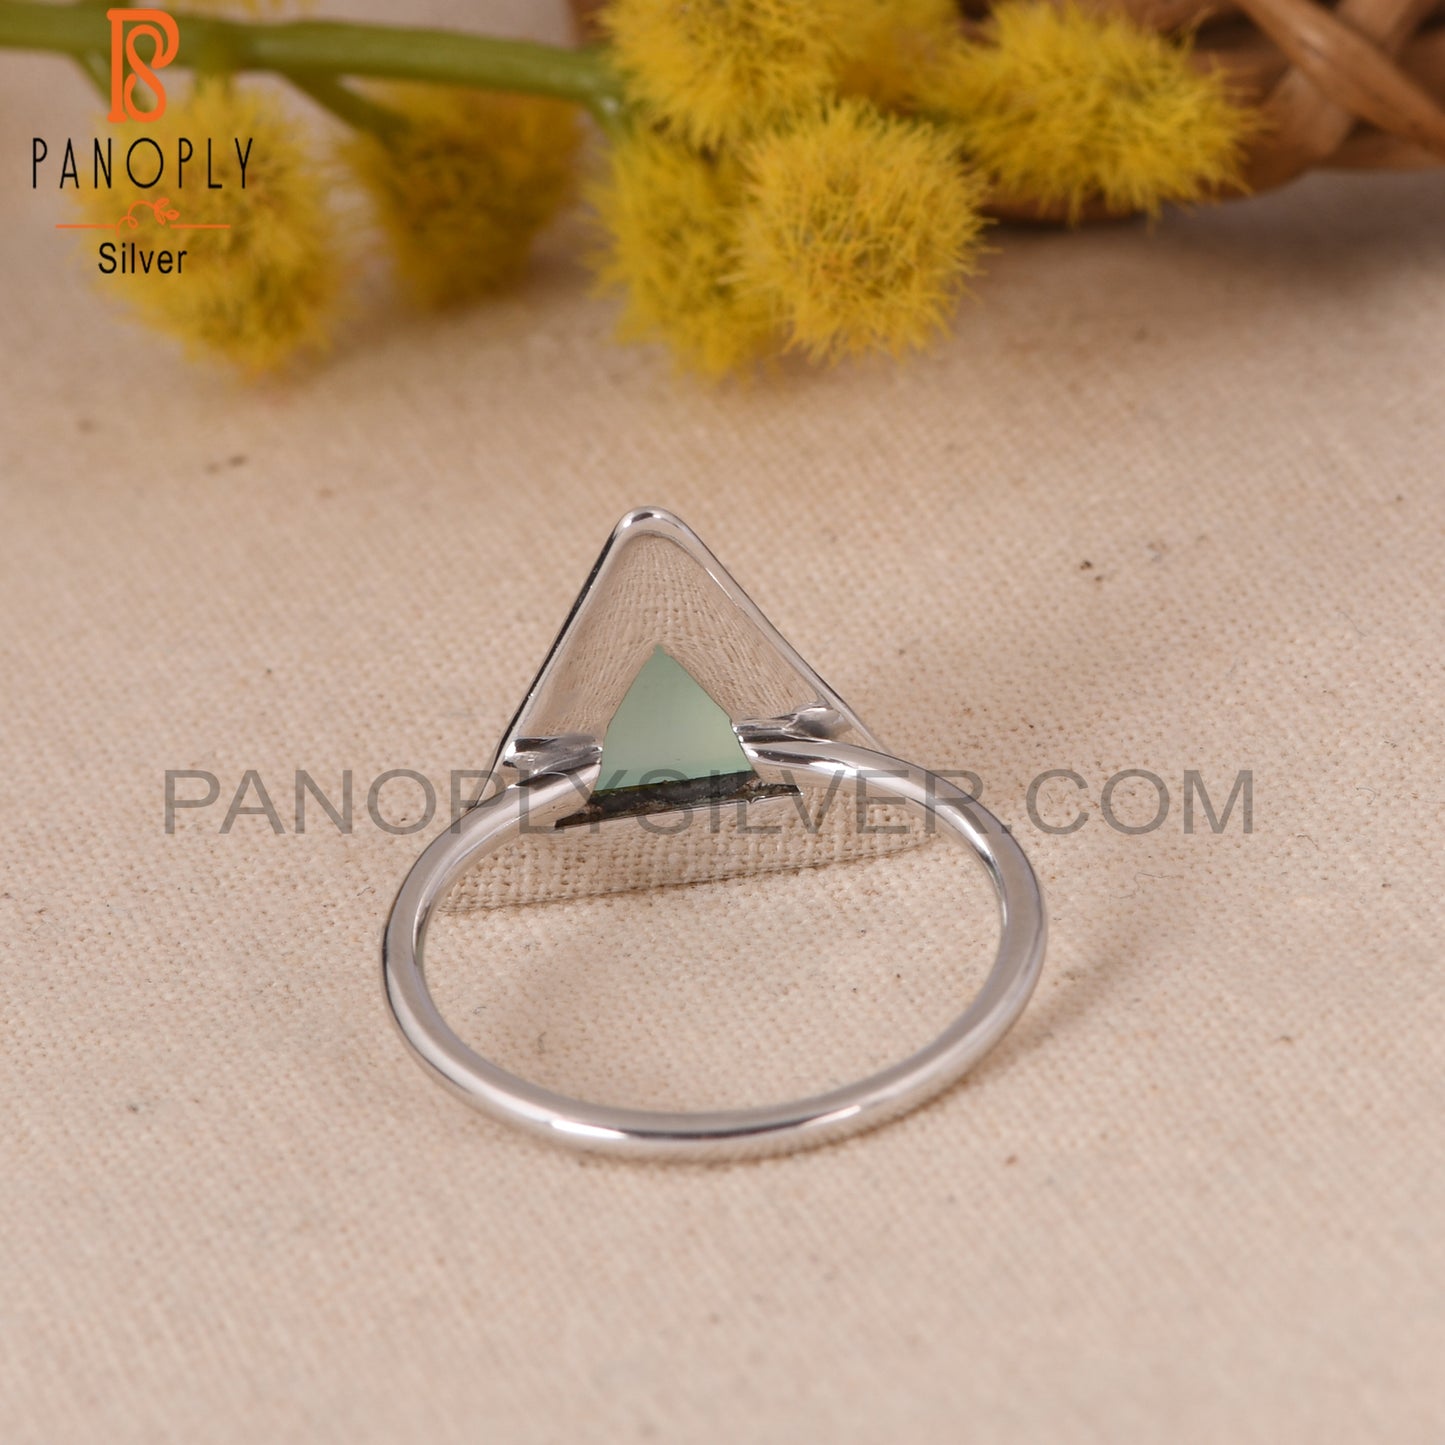 Triangle Shape 925 Sterling Silver Aqua Chalcedony Ring